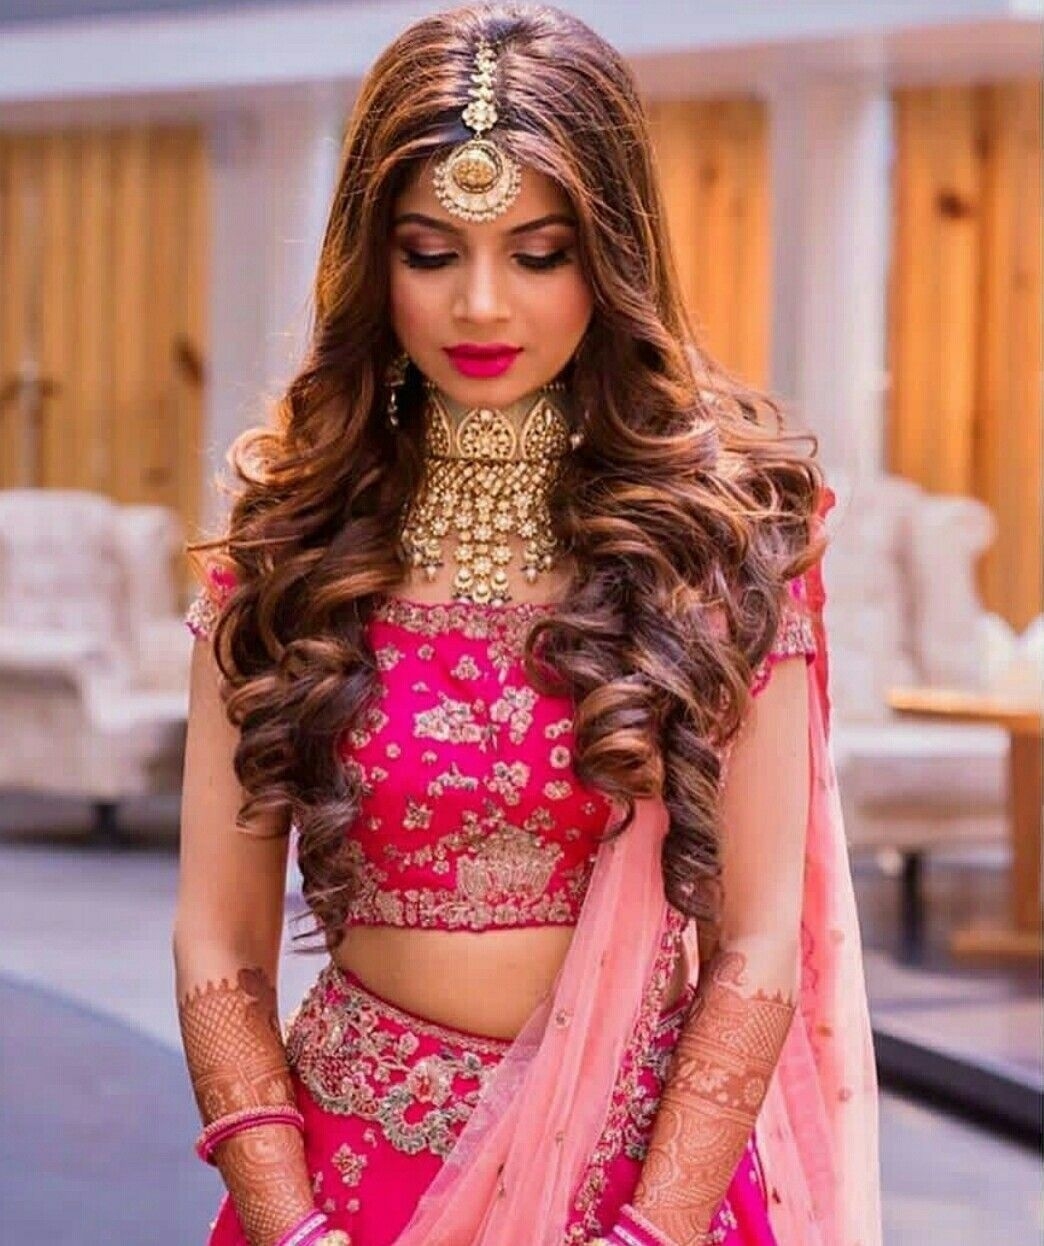 70 Bridal Hairstyles For 2019 Indian Brides | Indian Bride with Indian Hair Do For Wedding